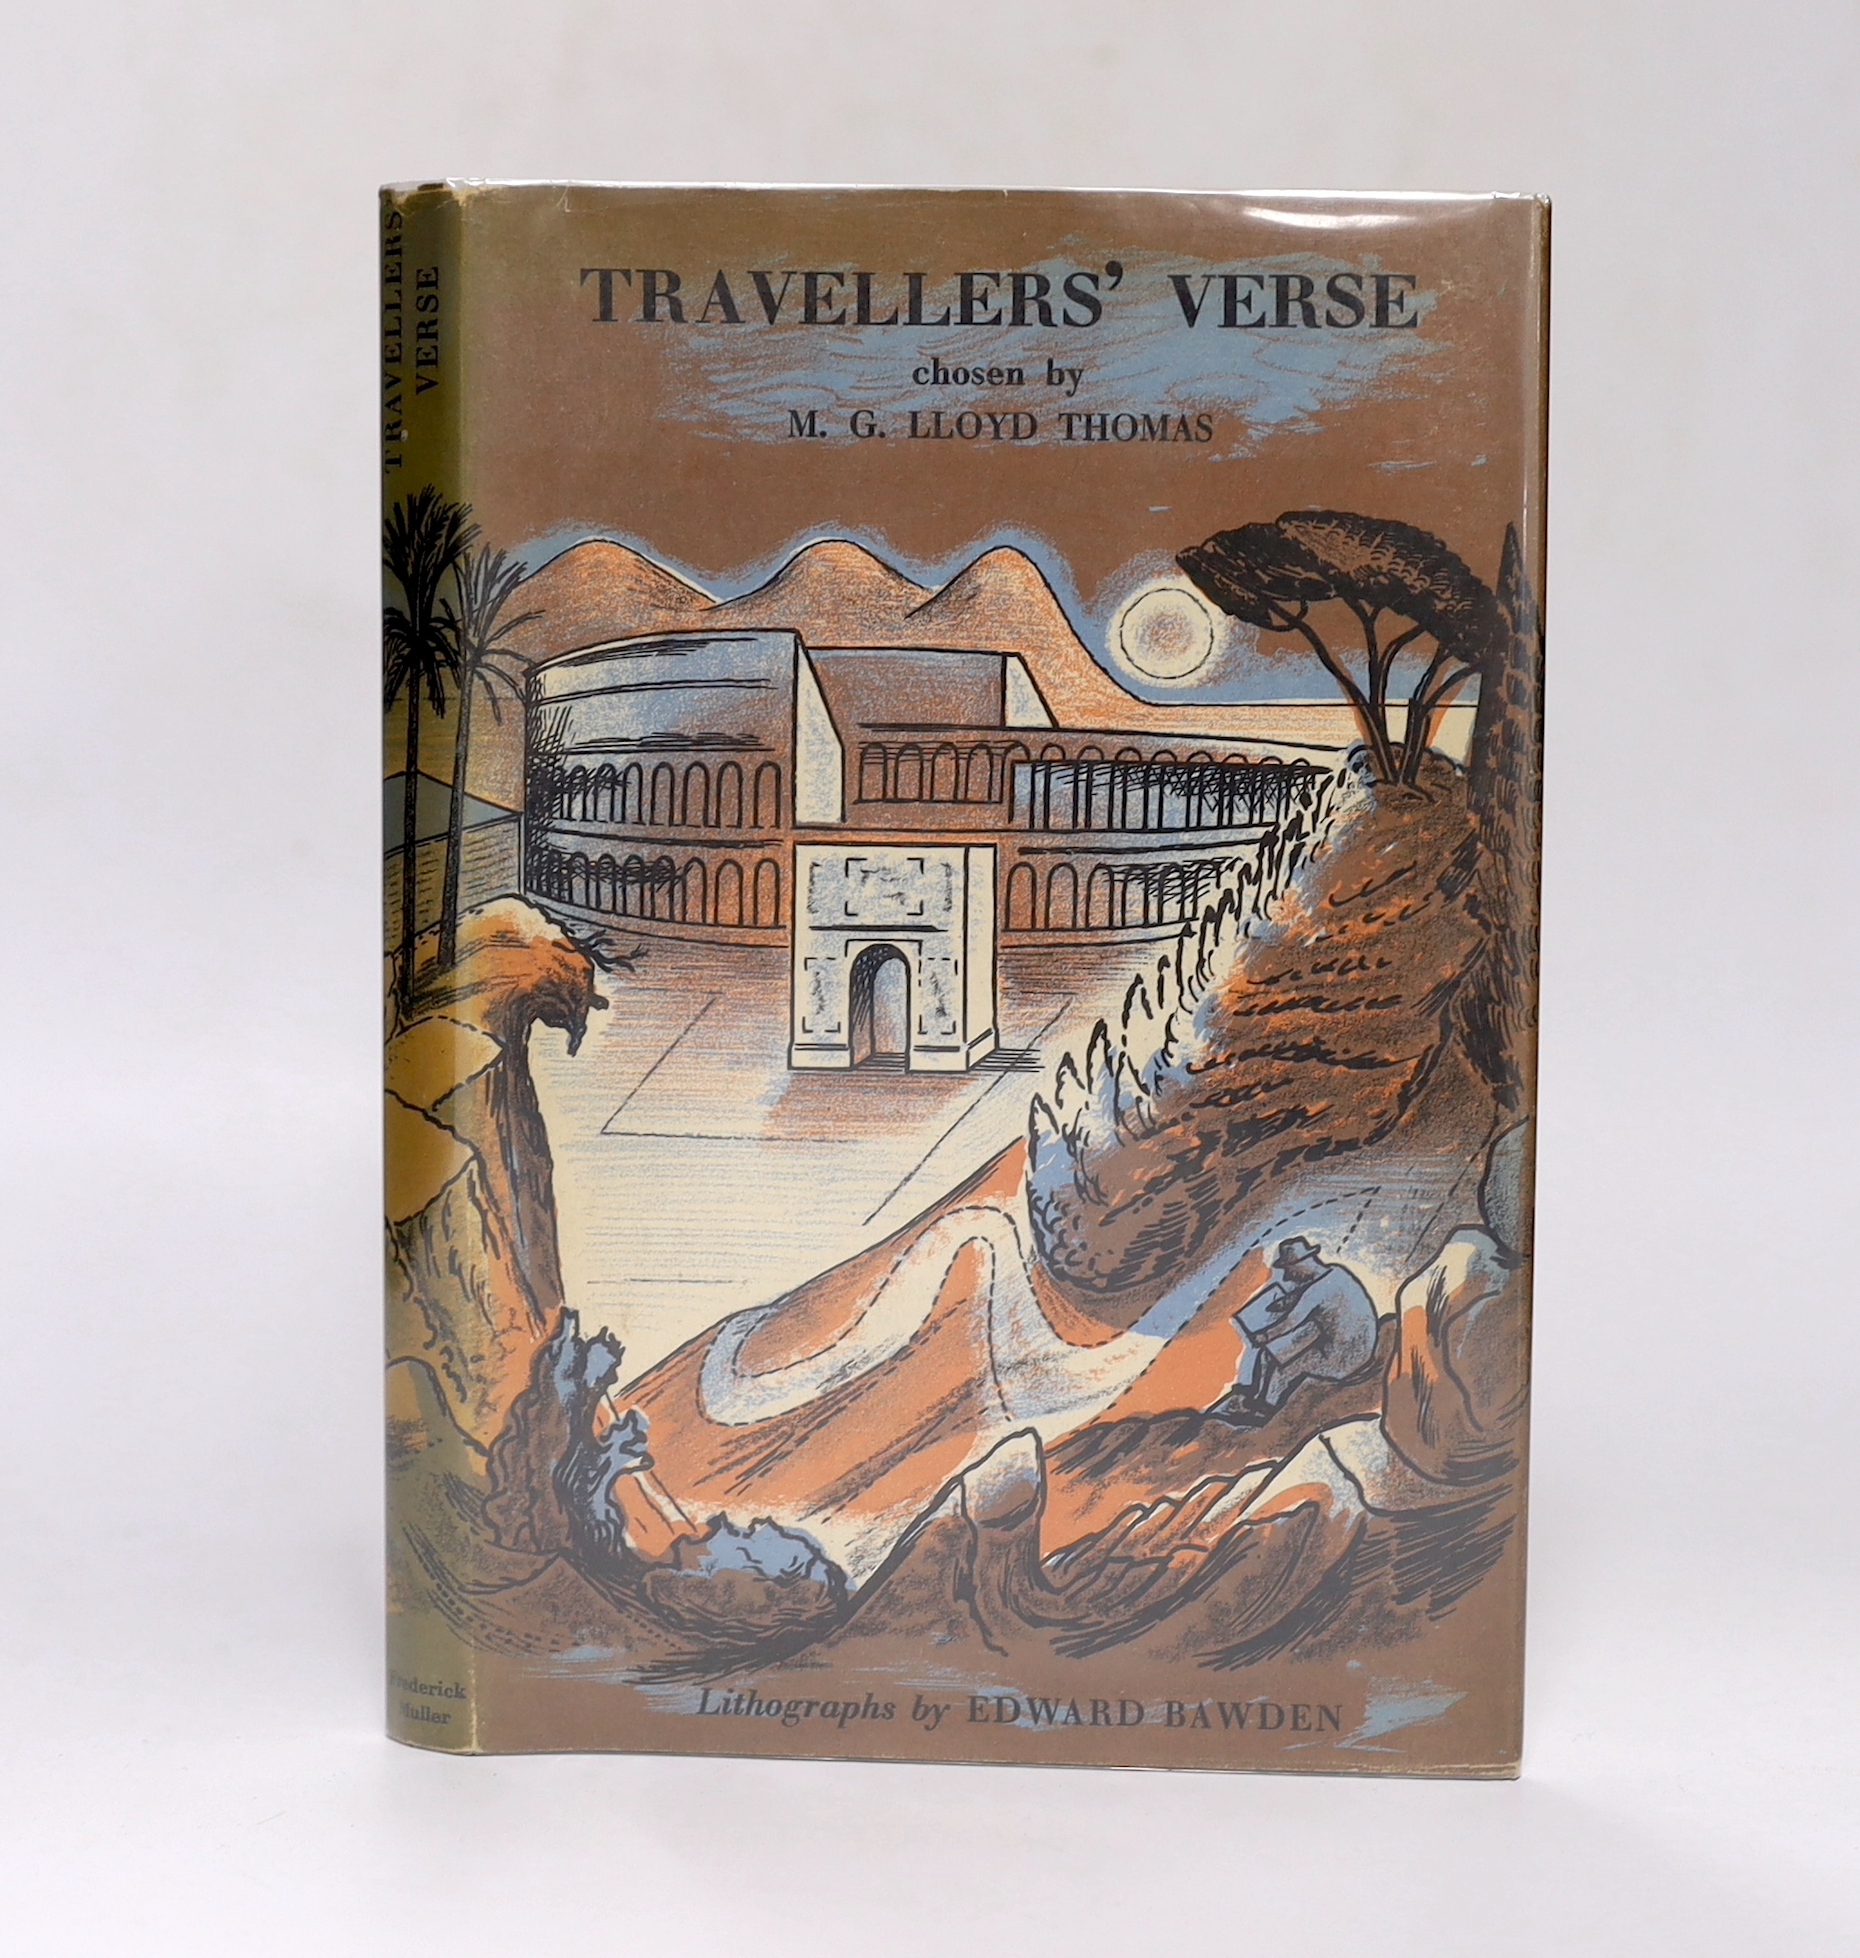 Thomas, M.G Lloyd (chosen by) - Travellers’ Verse, inscribed by Edward Bawden to the editor of the series, dated 9/1/47 and illustrated with 14 full-page coloured lithographs, 8vo, original pictorial cloth and matching d